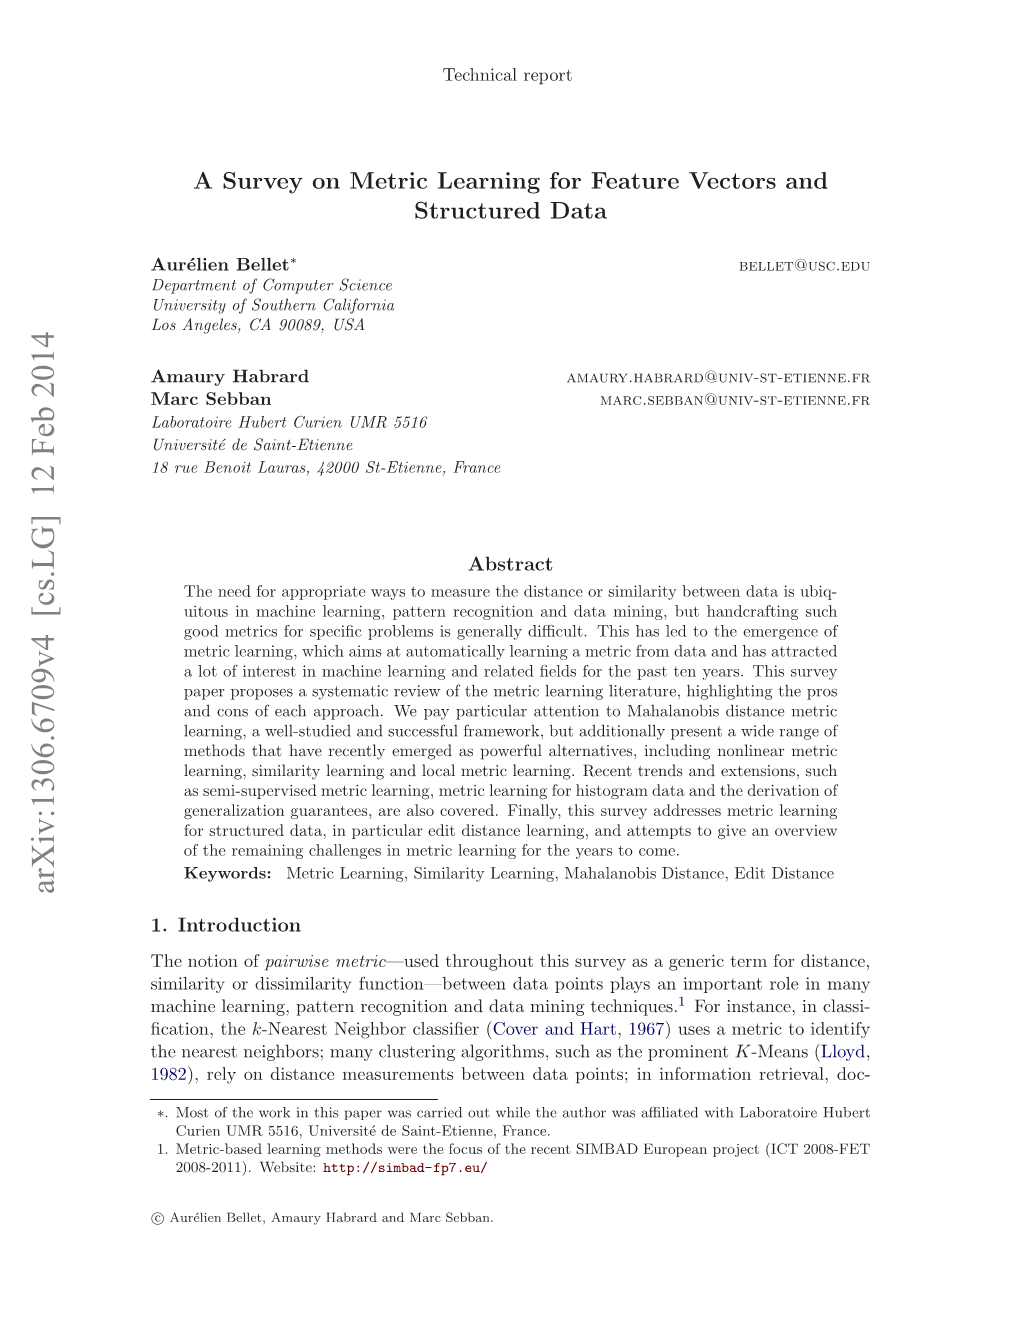 A Survey on Metric Learning for Feature Vectors and Structured Data